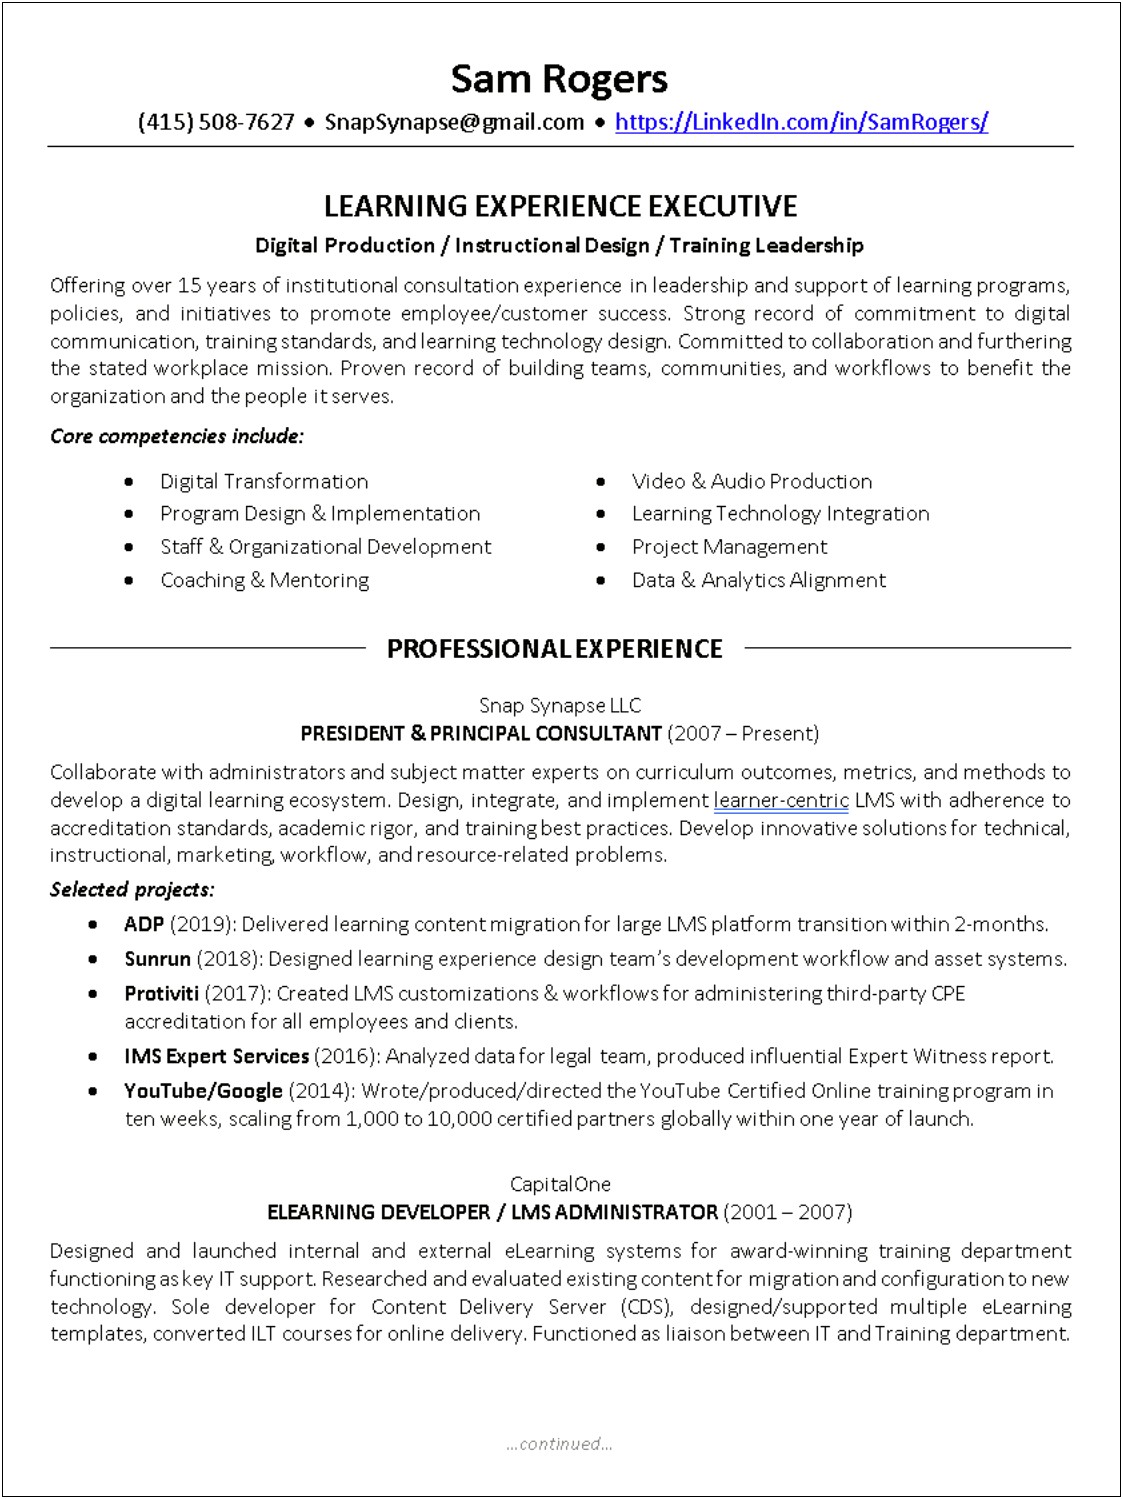 Capital One Production Support Experience Resume